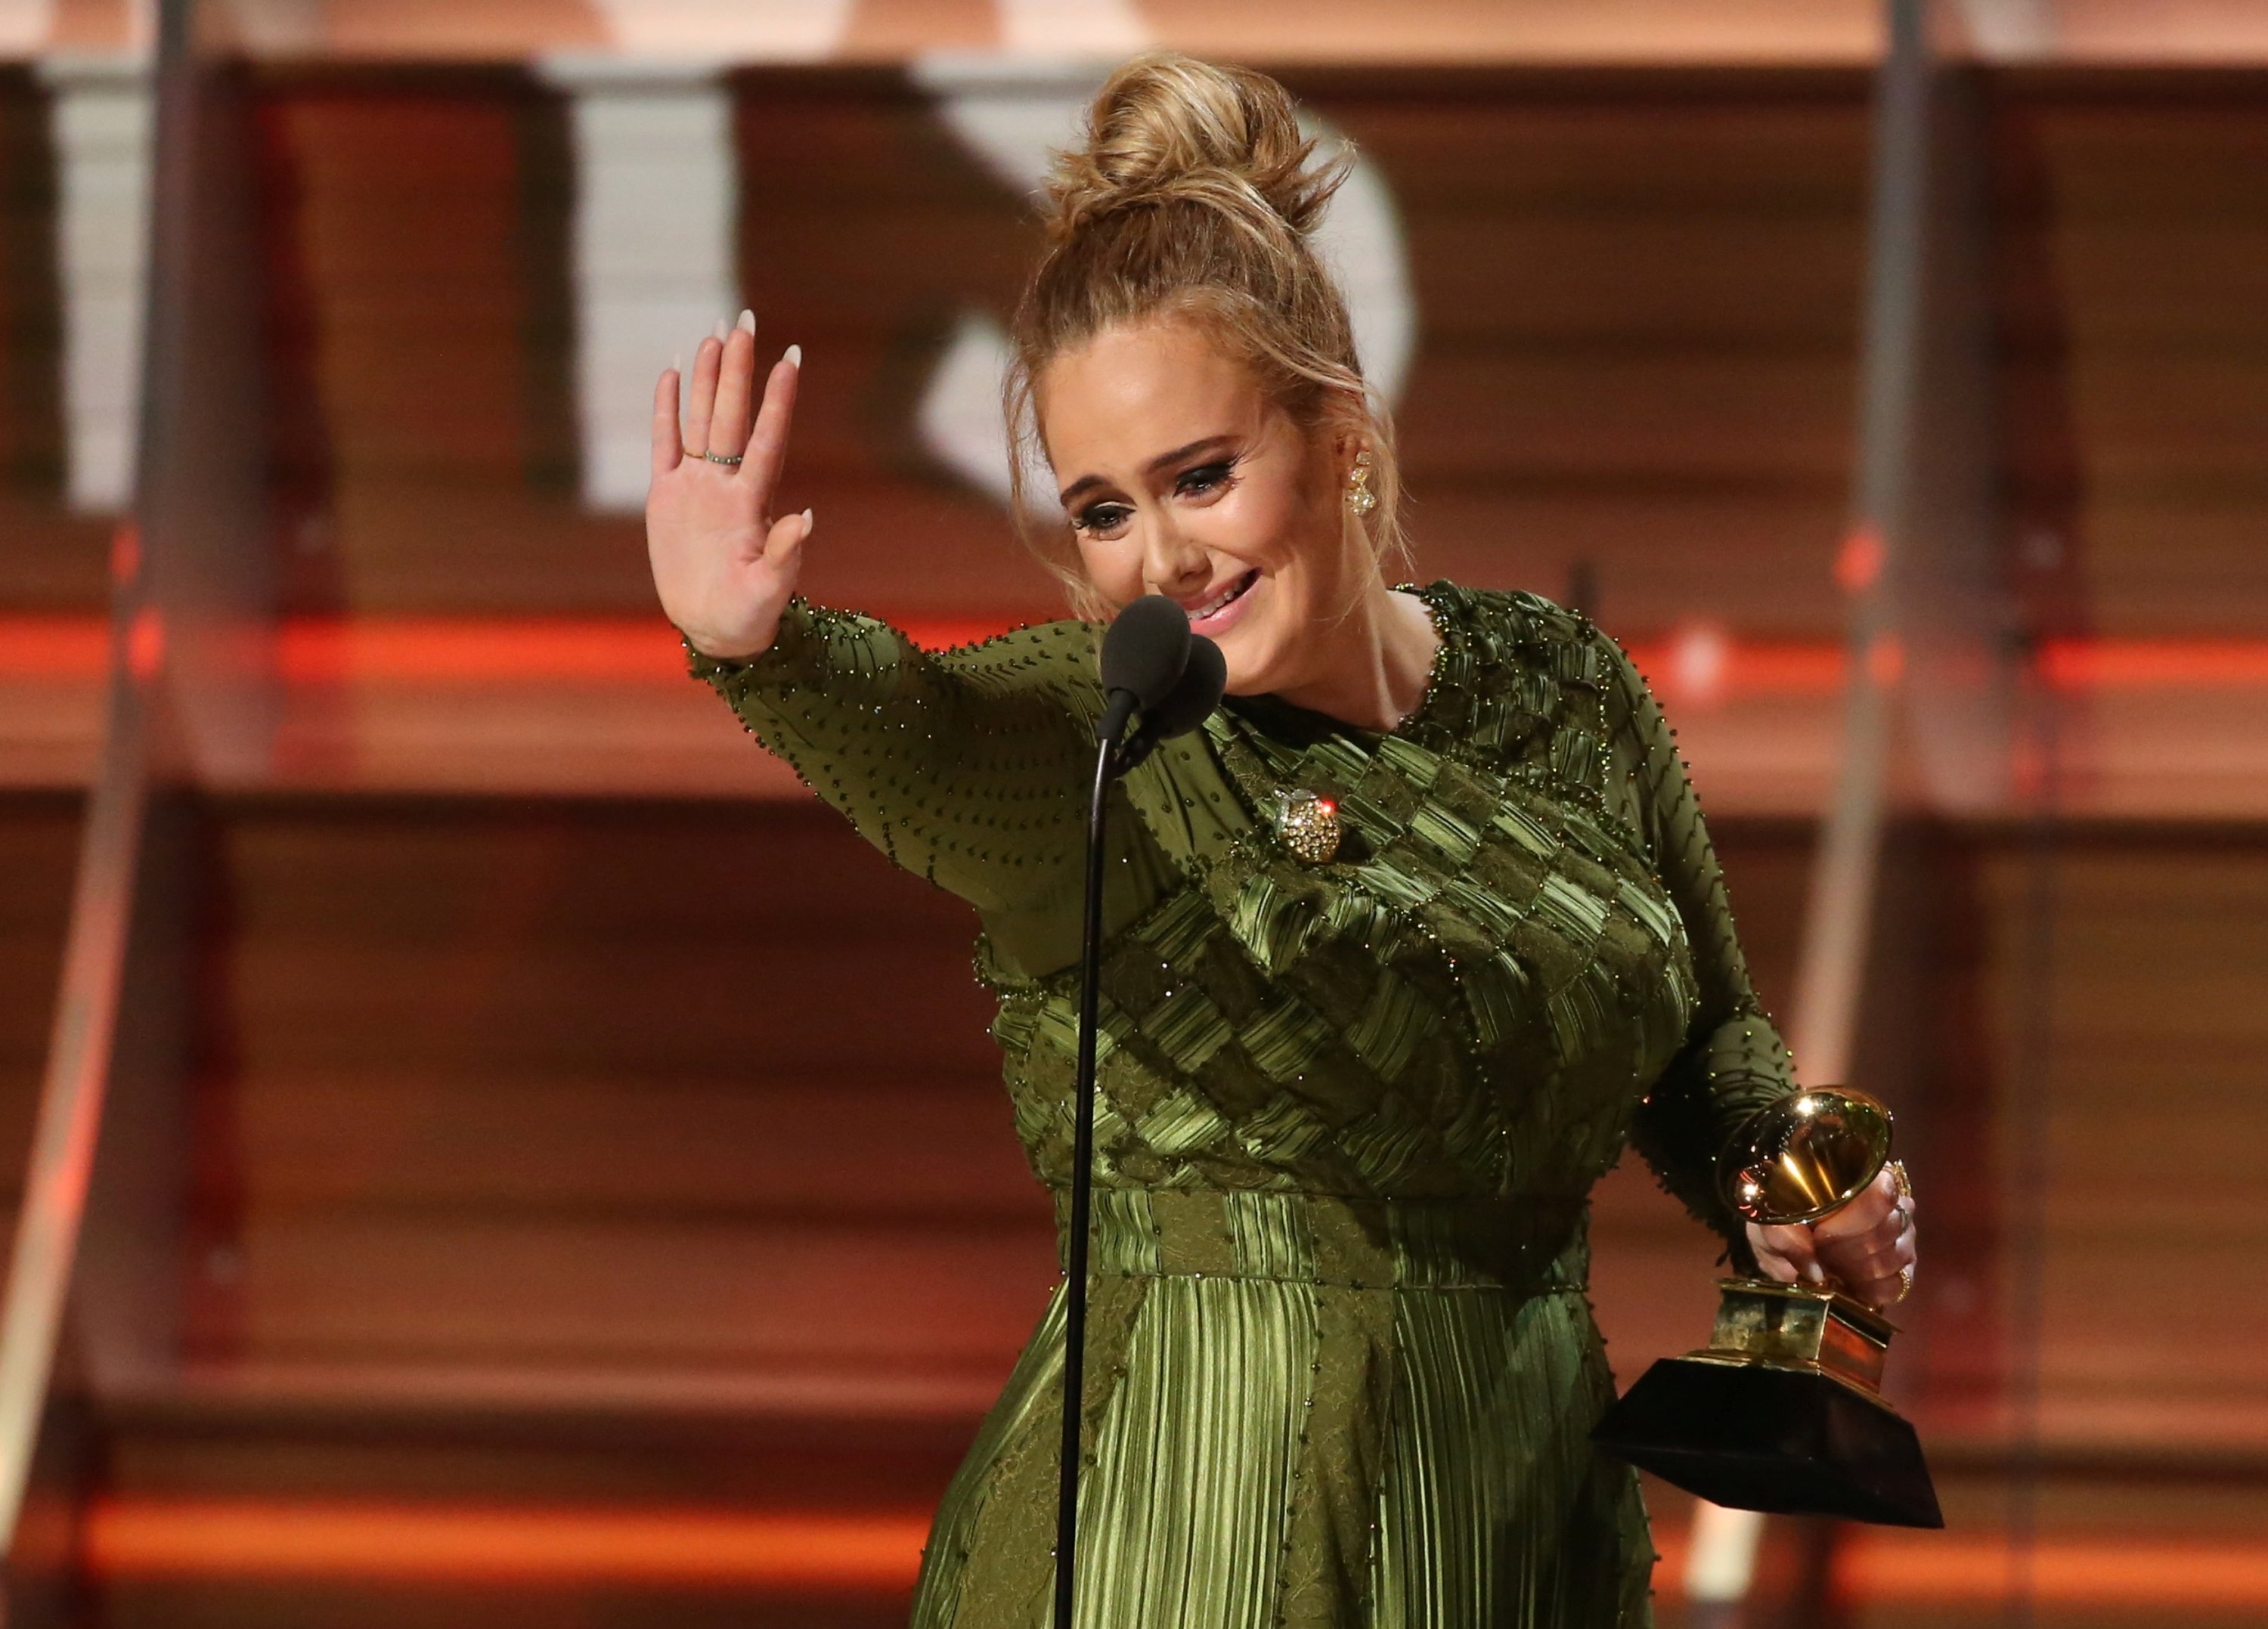 Adele waves to singer Beyonce who is in the audience as she and co-songwriter Greg Kurstin (not pictured) accept the Grammy for Song of the Year for 